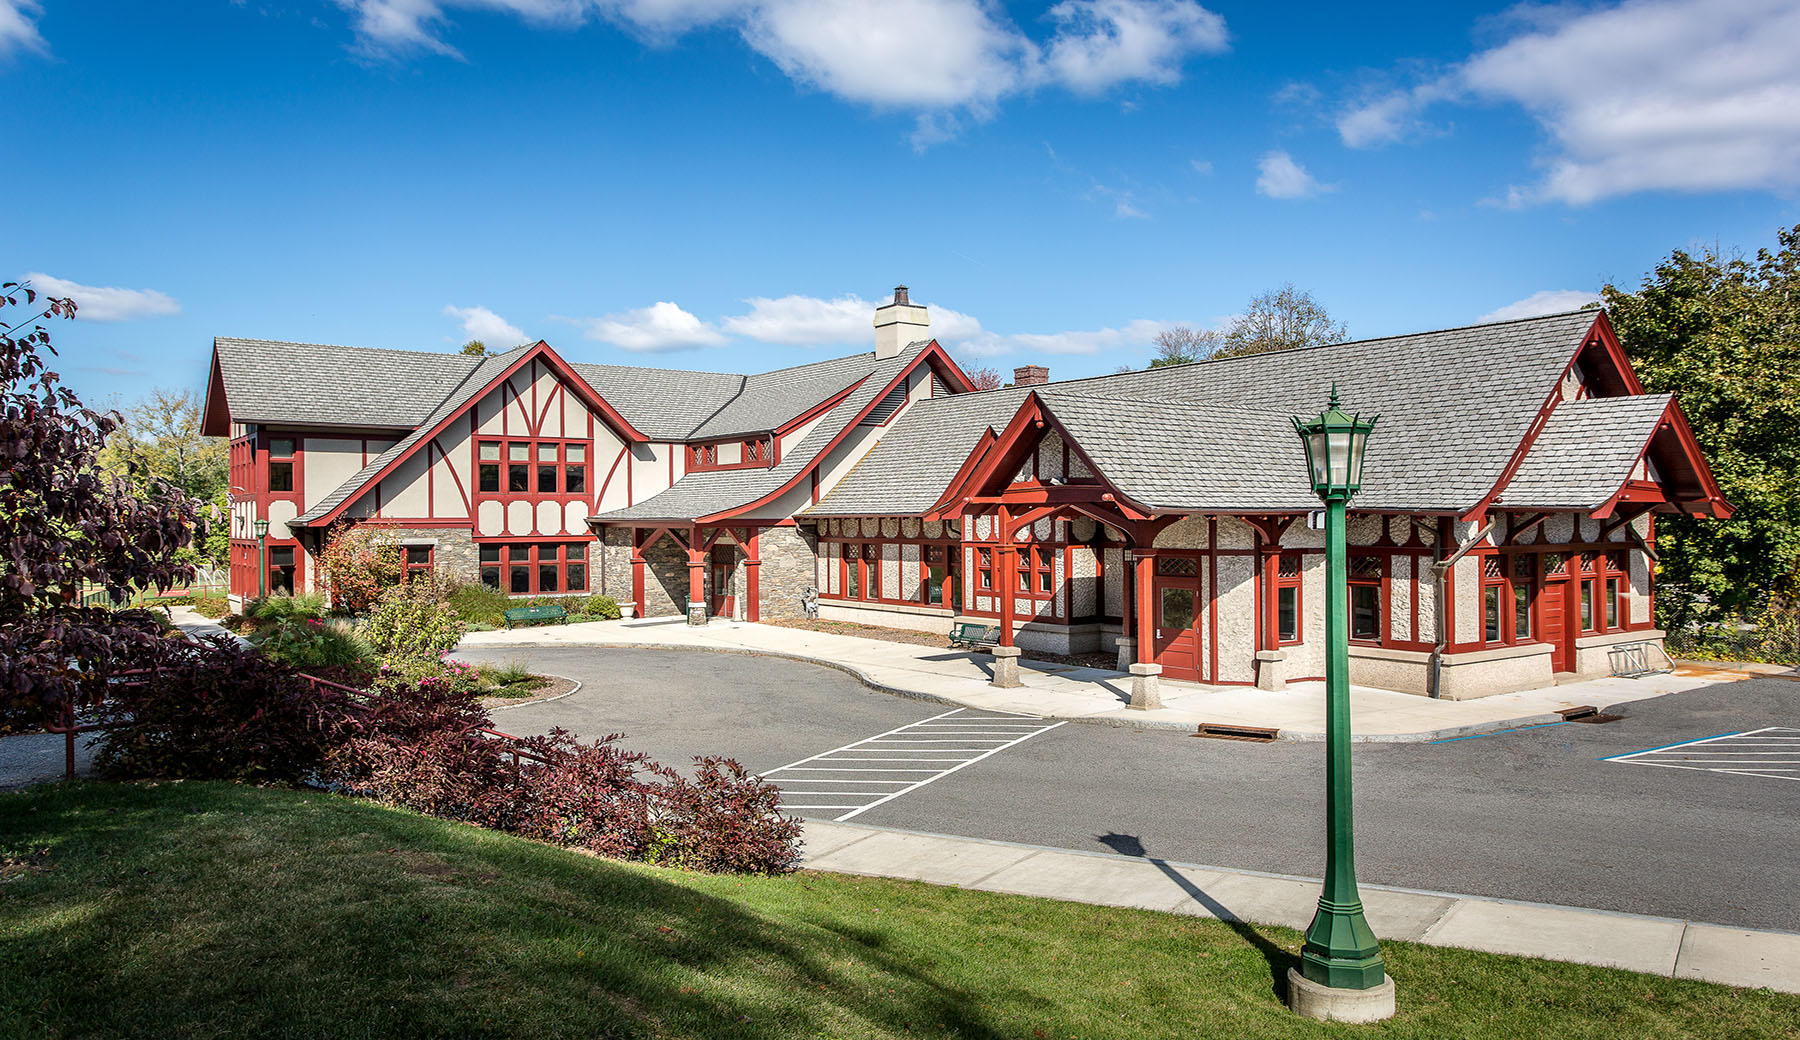 Lothrop Associates expanded the Briarcliff Manor Public Library with an 8,000 SF addition. The renovation maintains the character of the original historic building and the surrounding community while incorporating modern, efficient building systems.